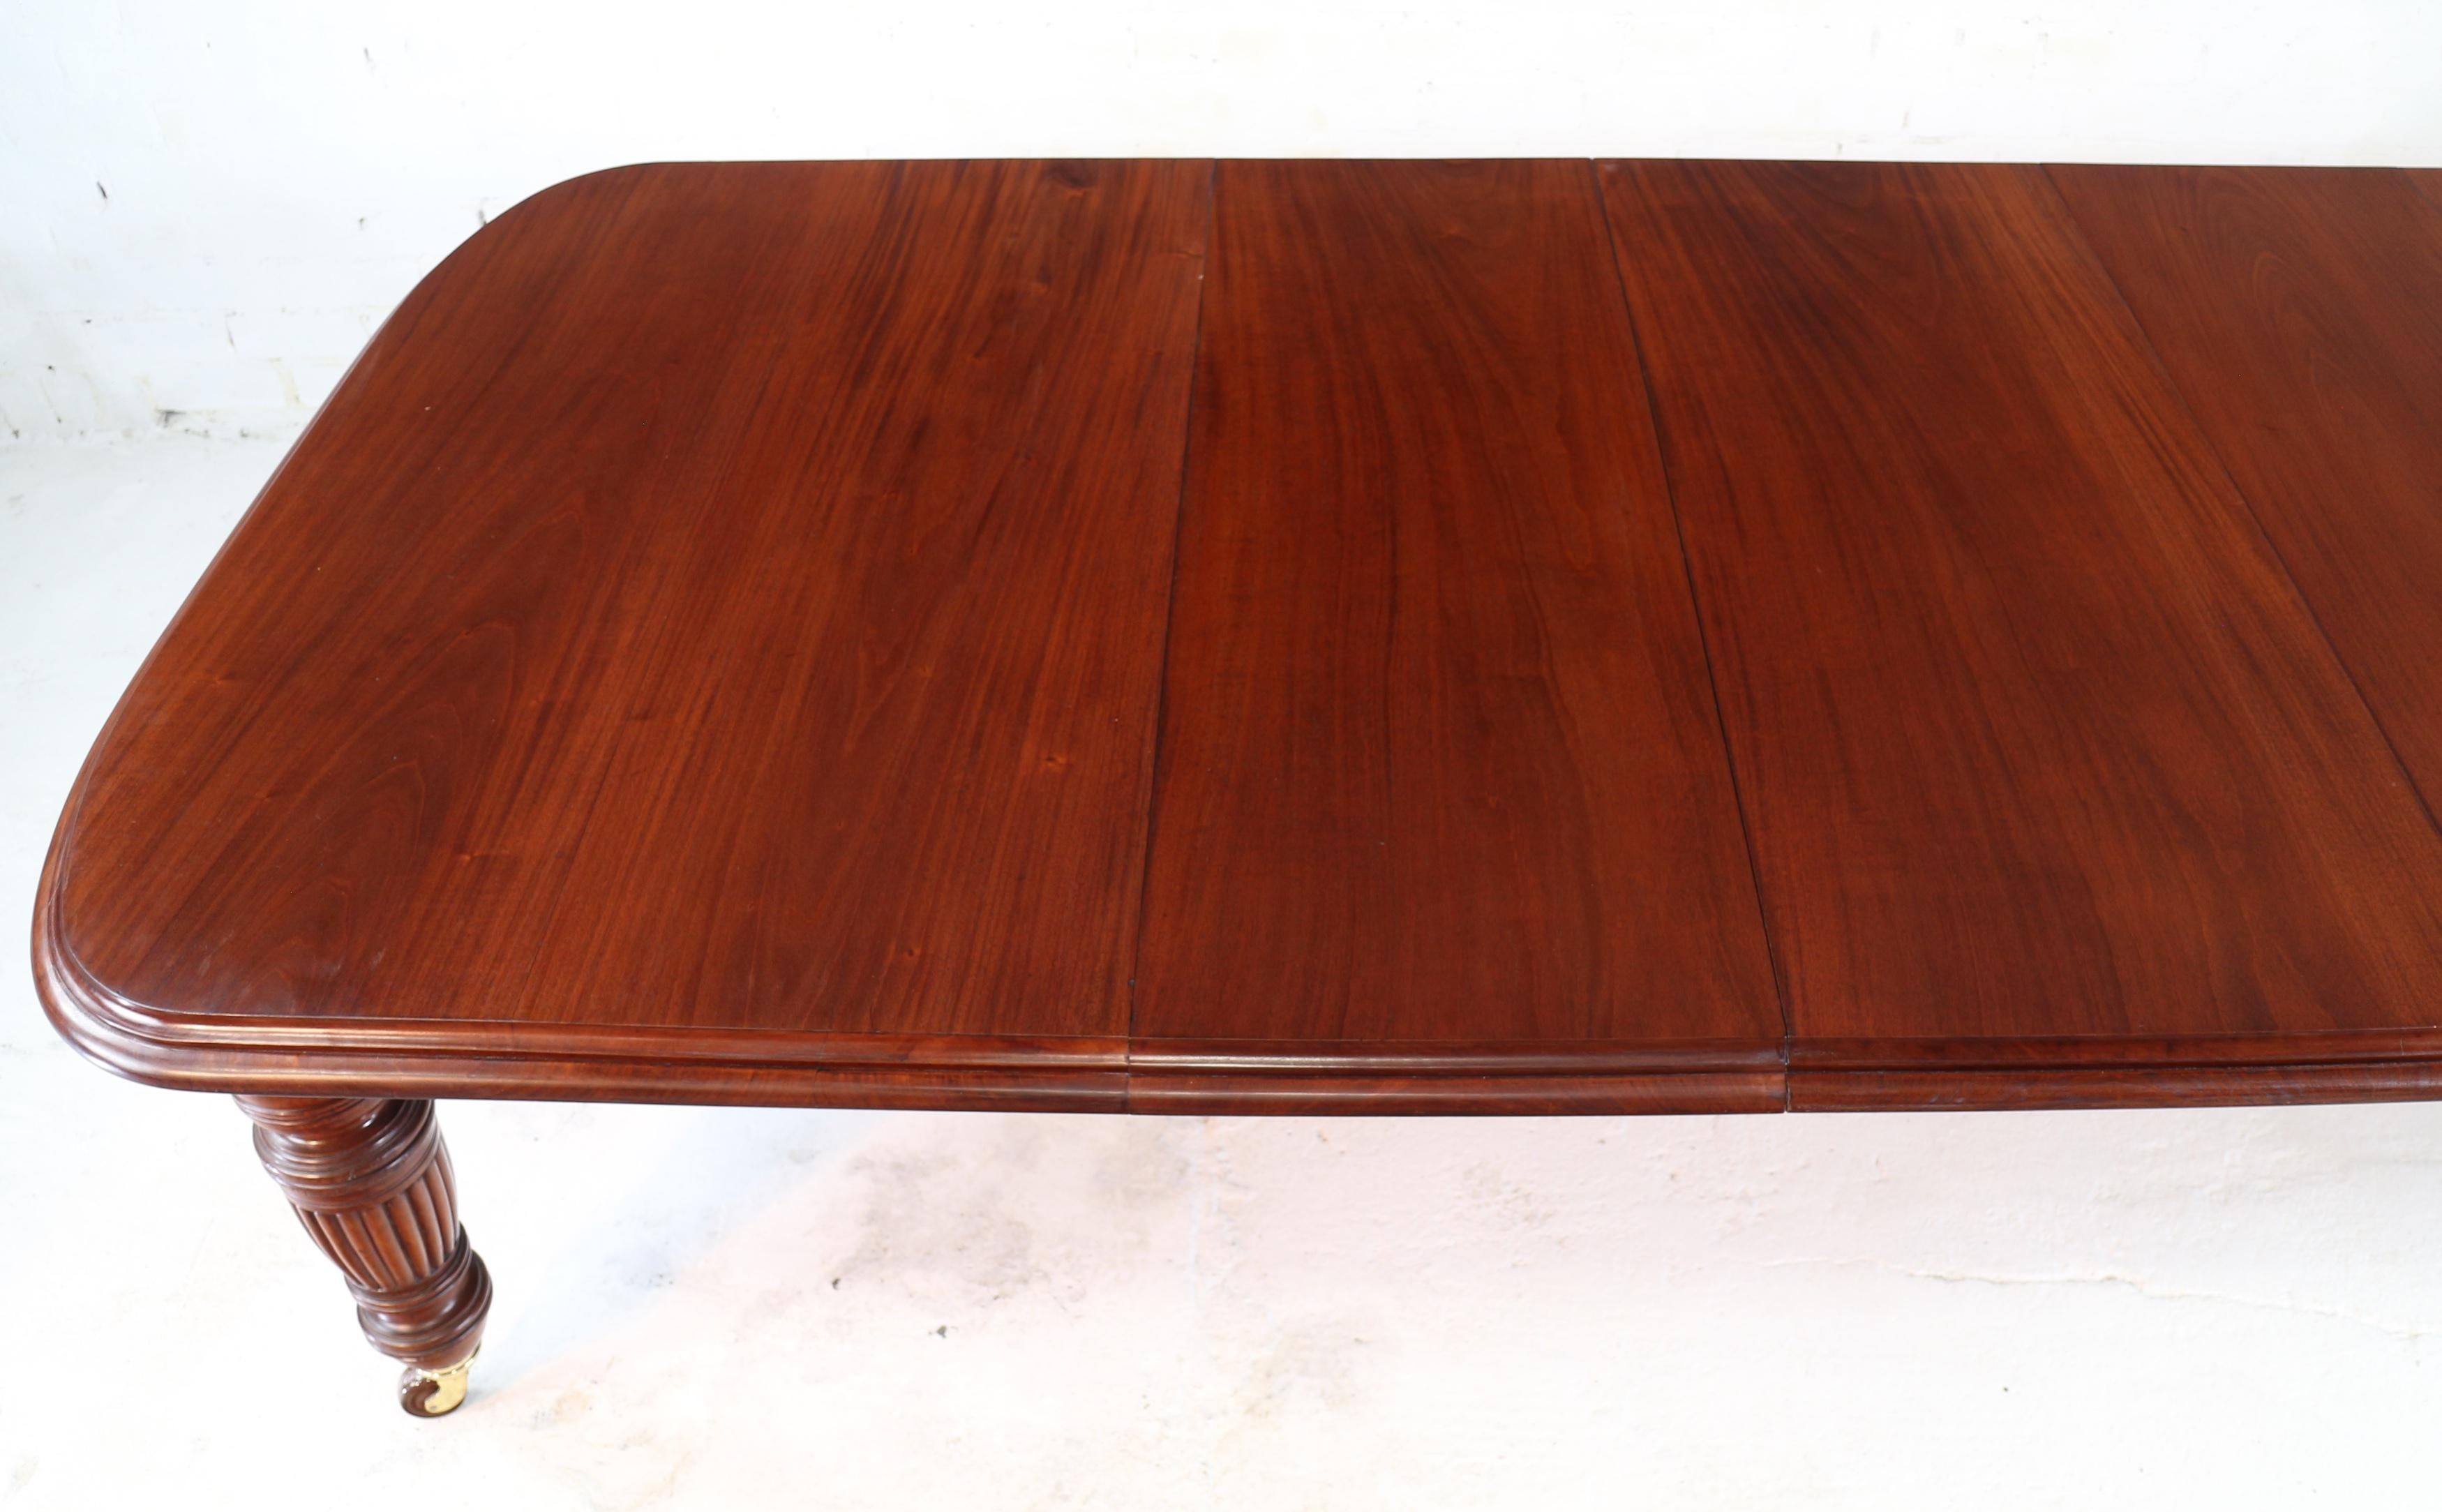 Hand-Crafted Antique English Victorian Mahogany Extending Dining Table & 3 Leaves, Seats 12 For Sale